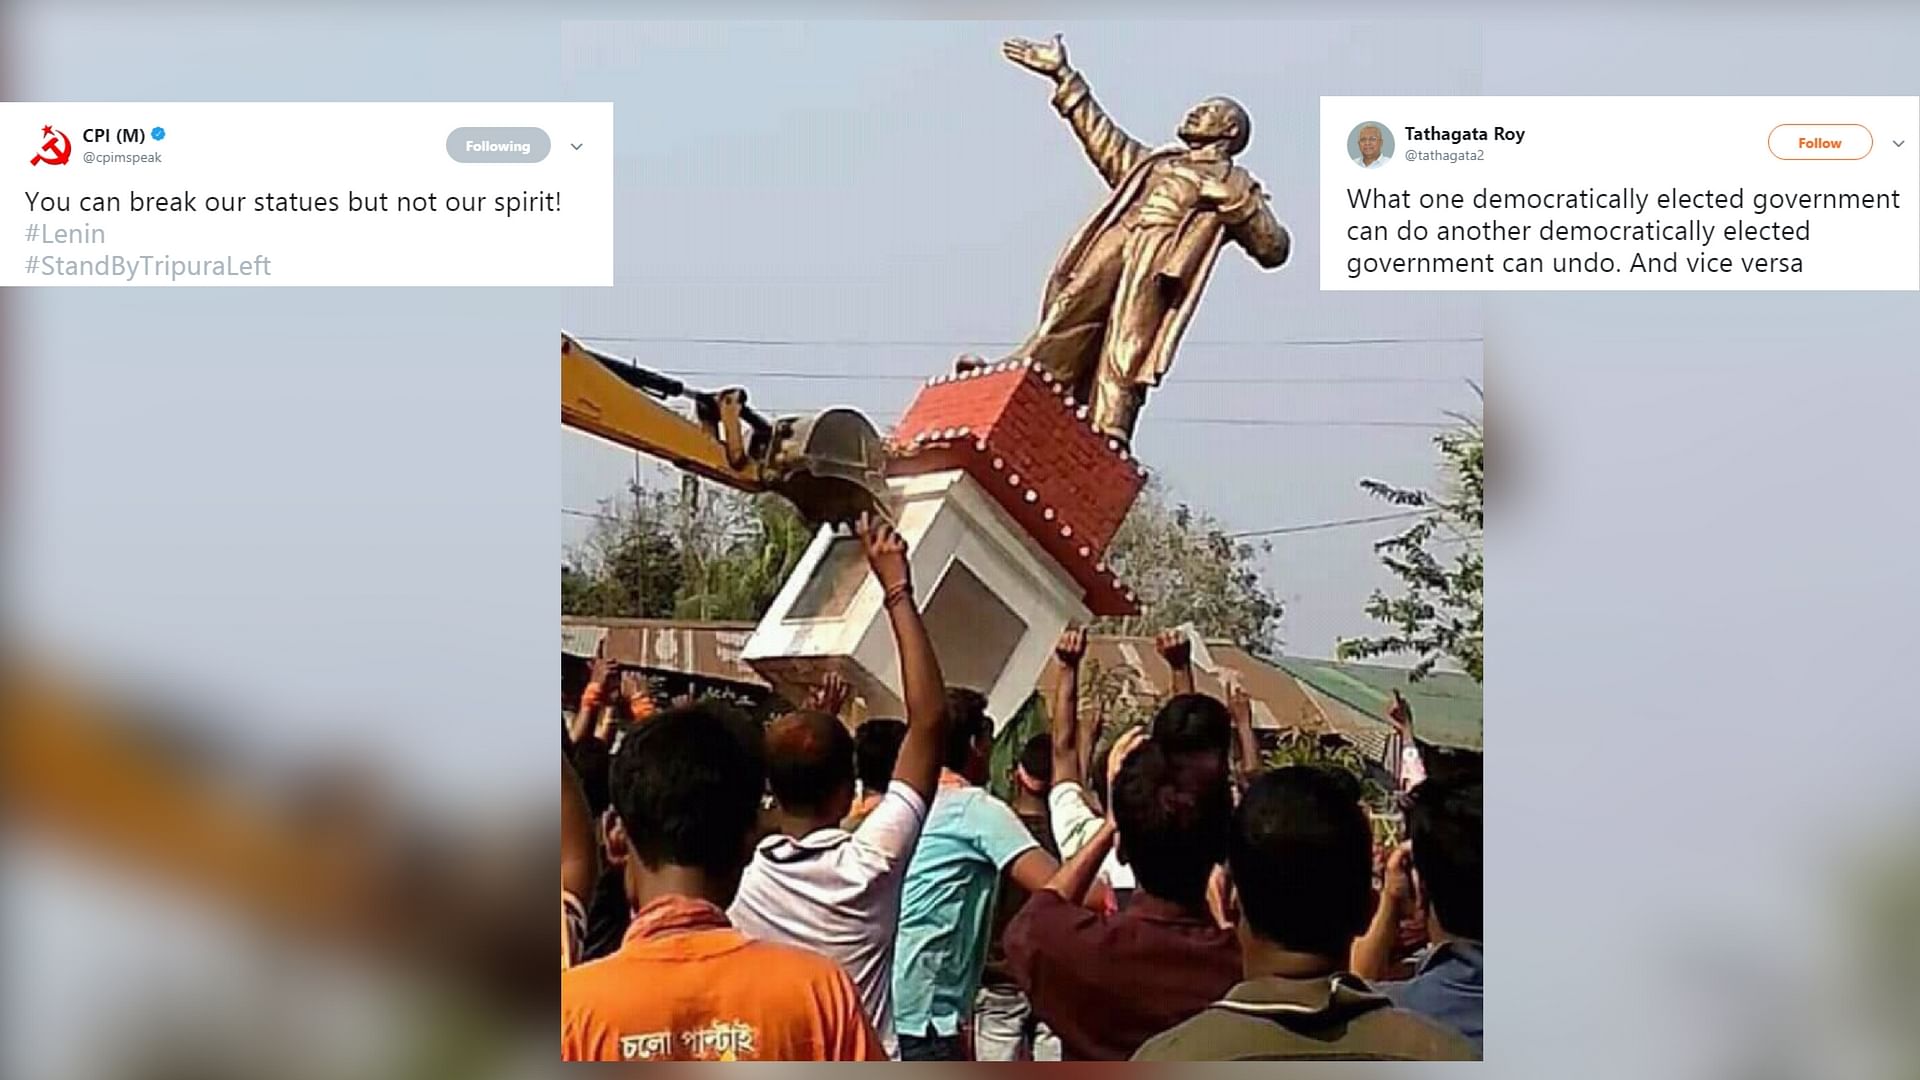 Statue of Lenin being taken down in Tripura’s Belonia, two days after the BJP’s victory in the state.